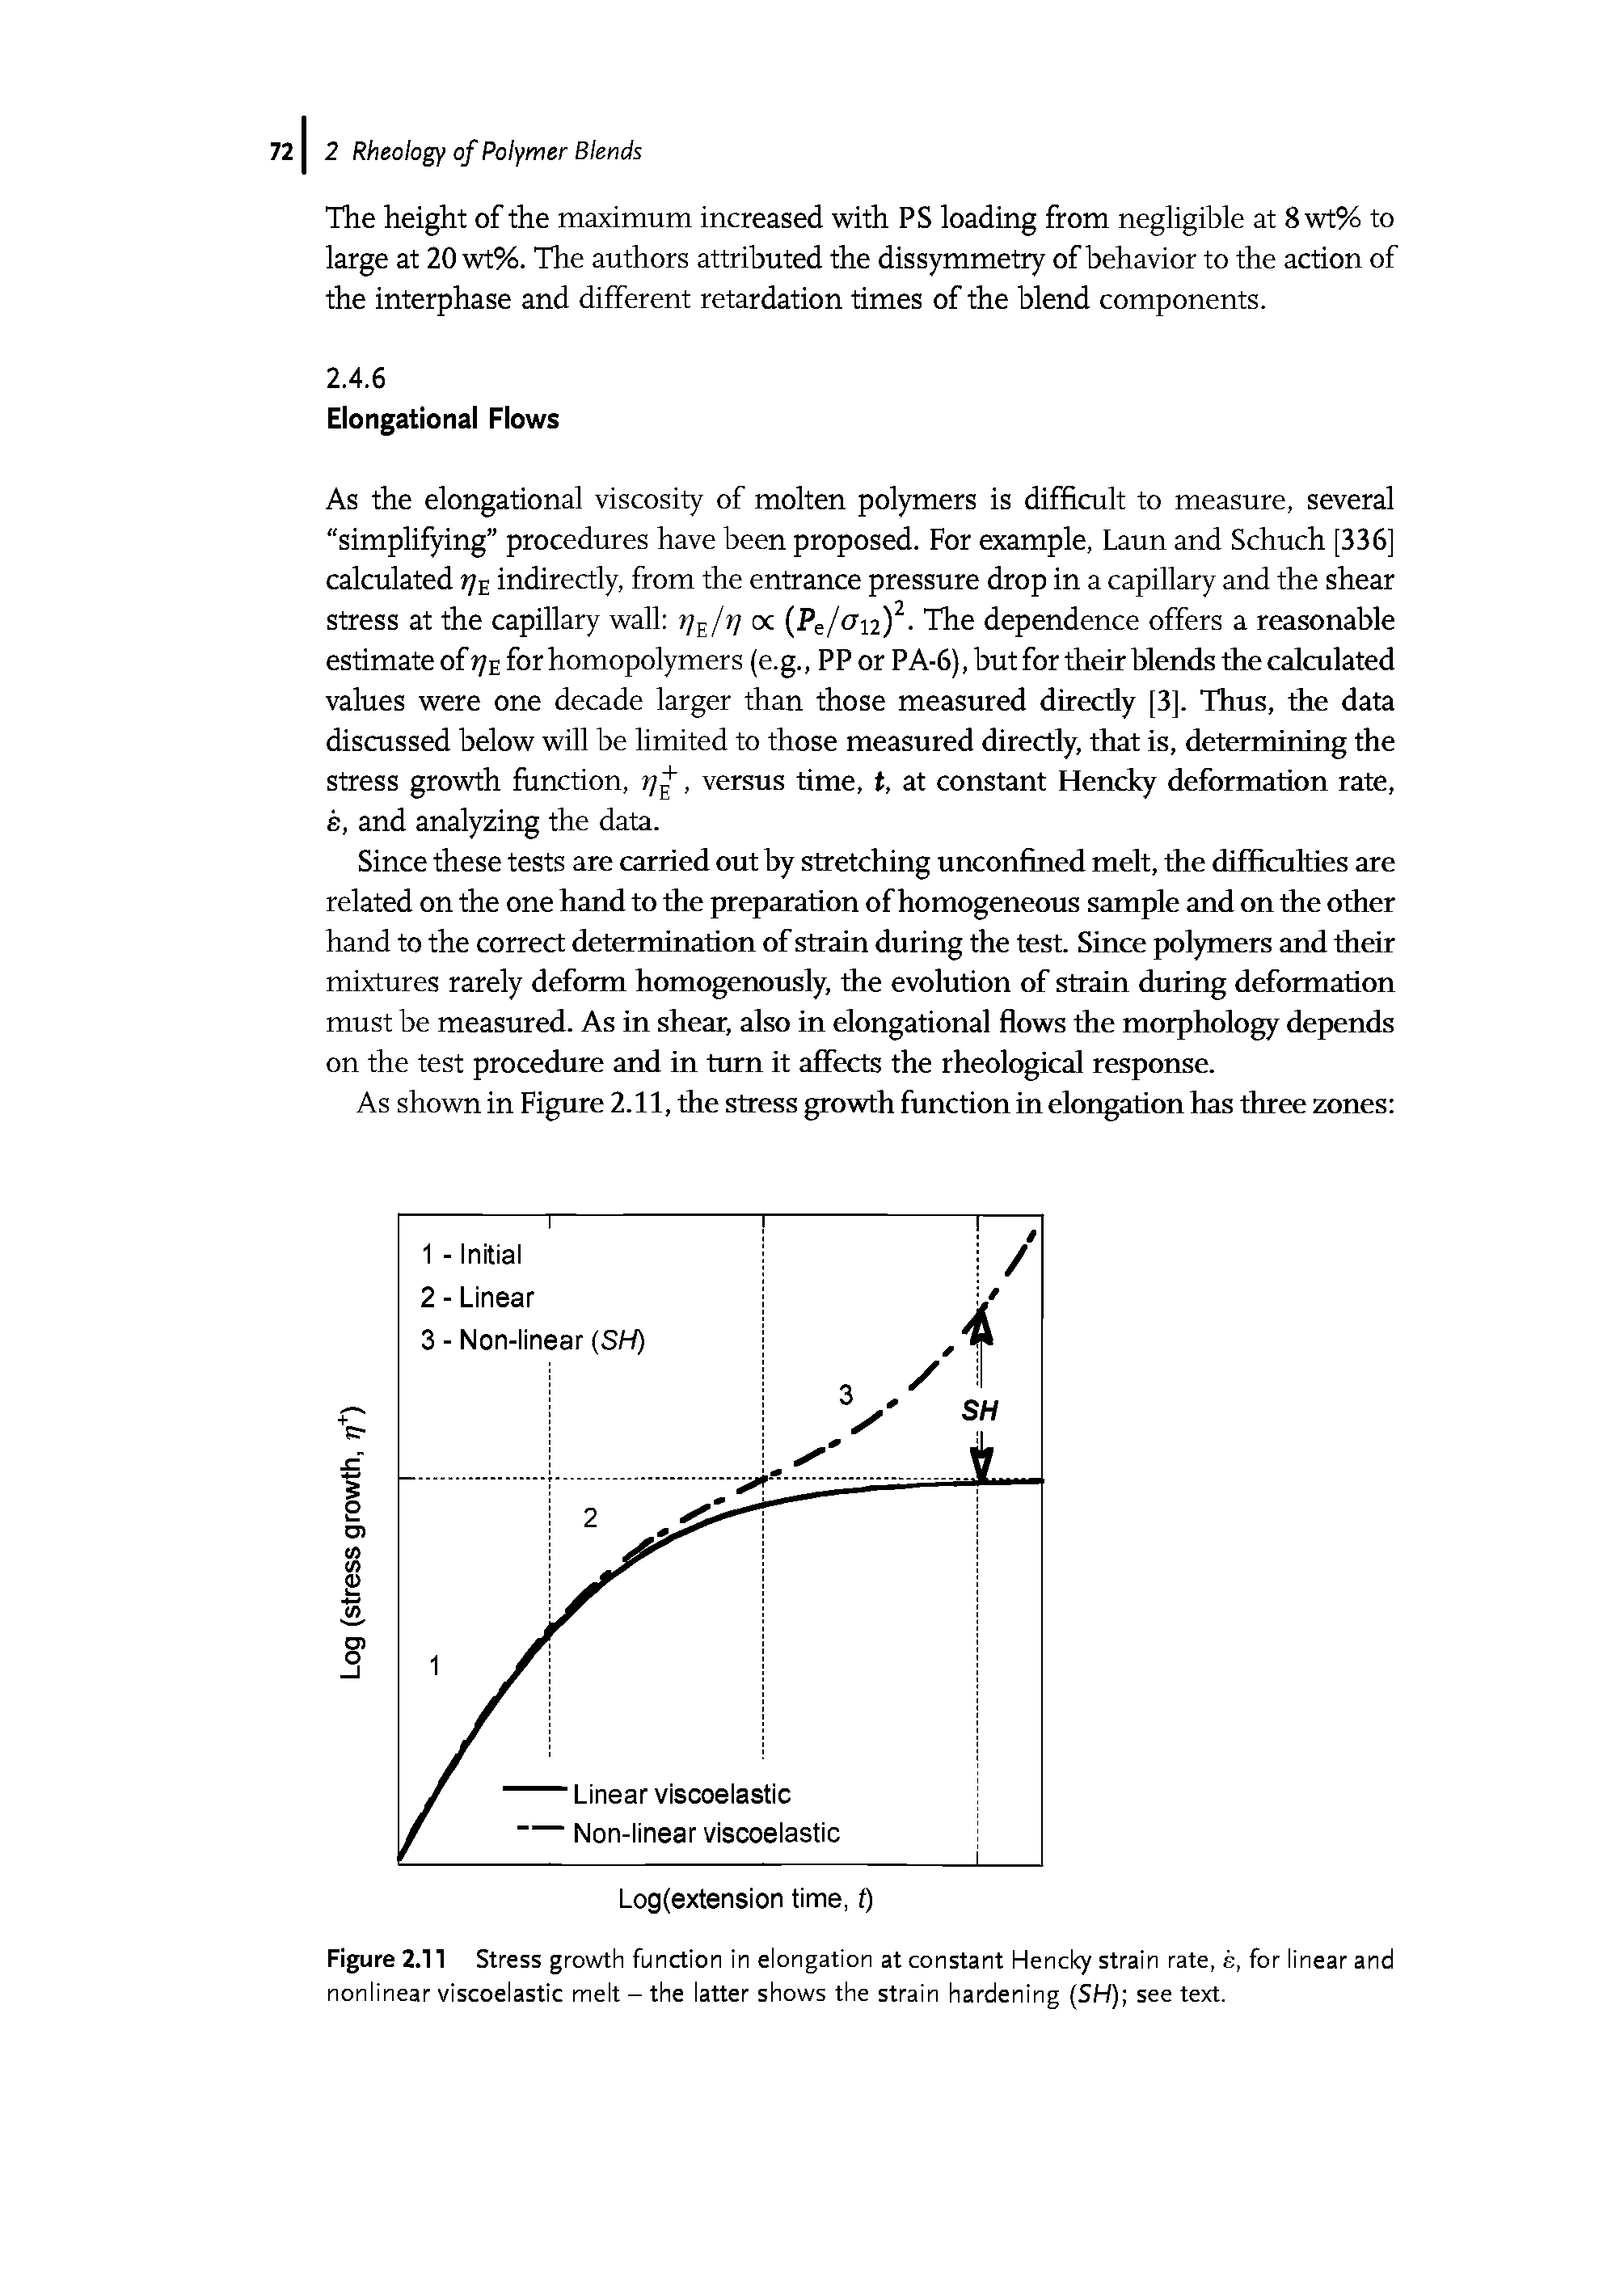 Figure 2.11 Stress growth function in elongation at constant Hencky strain rate, e, for linear and nonlinear viscoelastic melt - the latter shows the strain hardening (SH) see text.